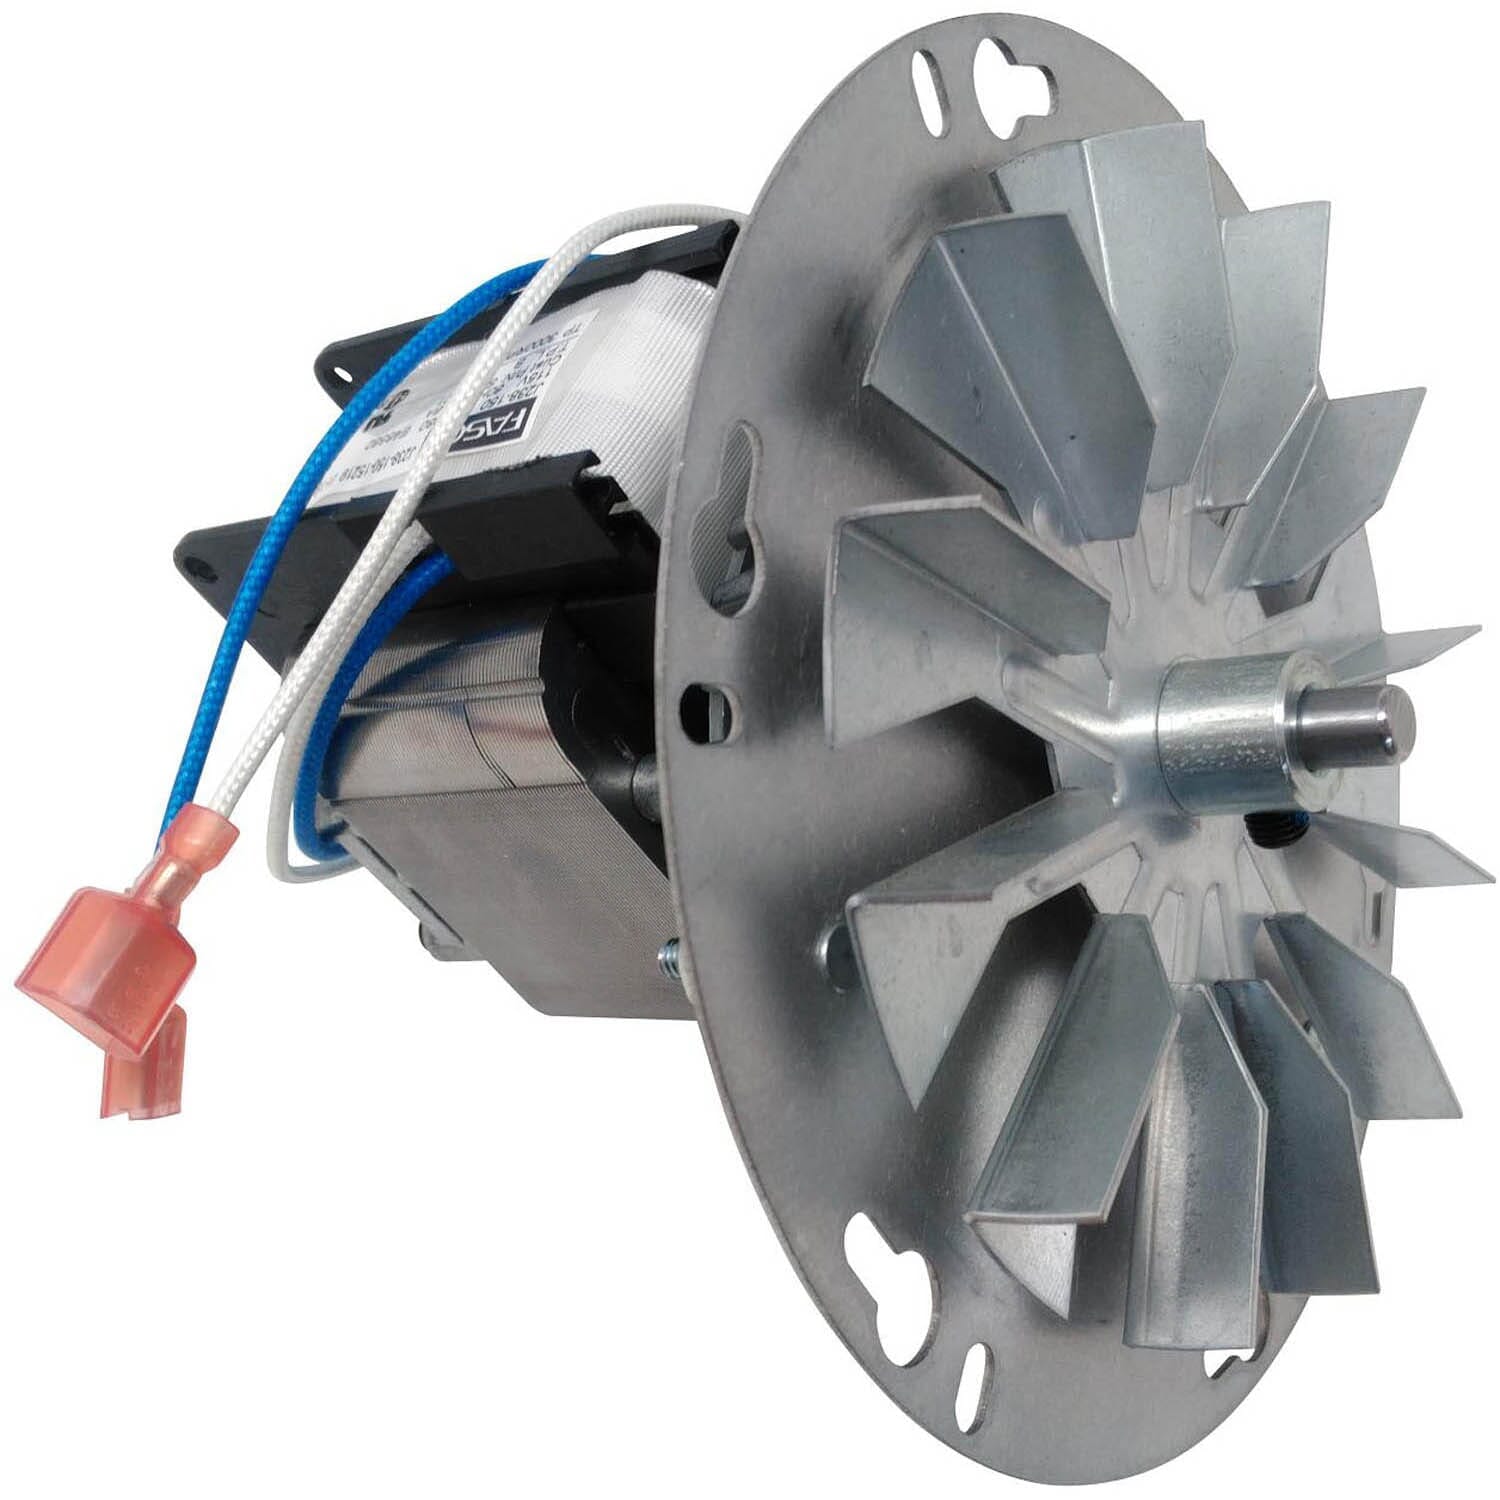 US Stove American Harvest Combustion Blower Draft Fan 80495